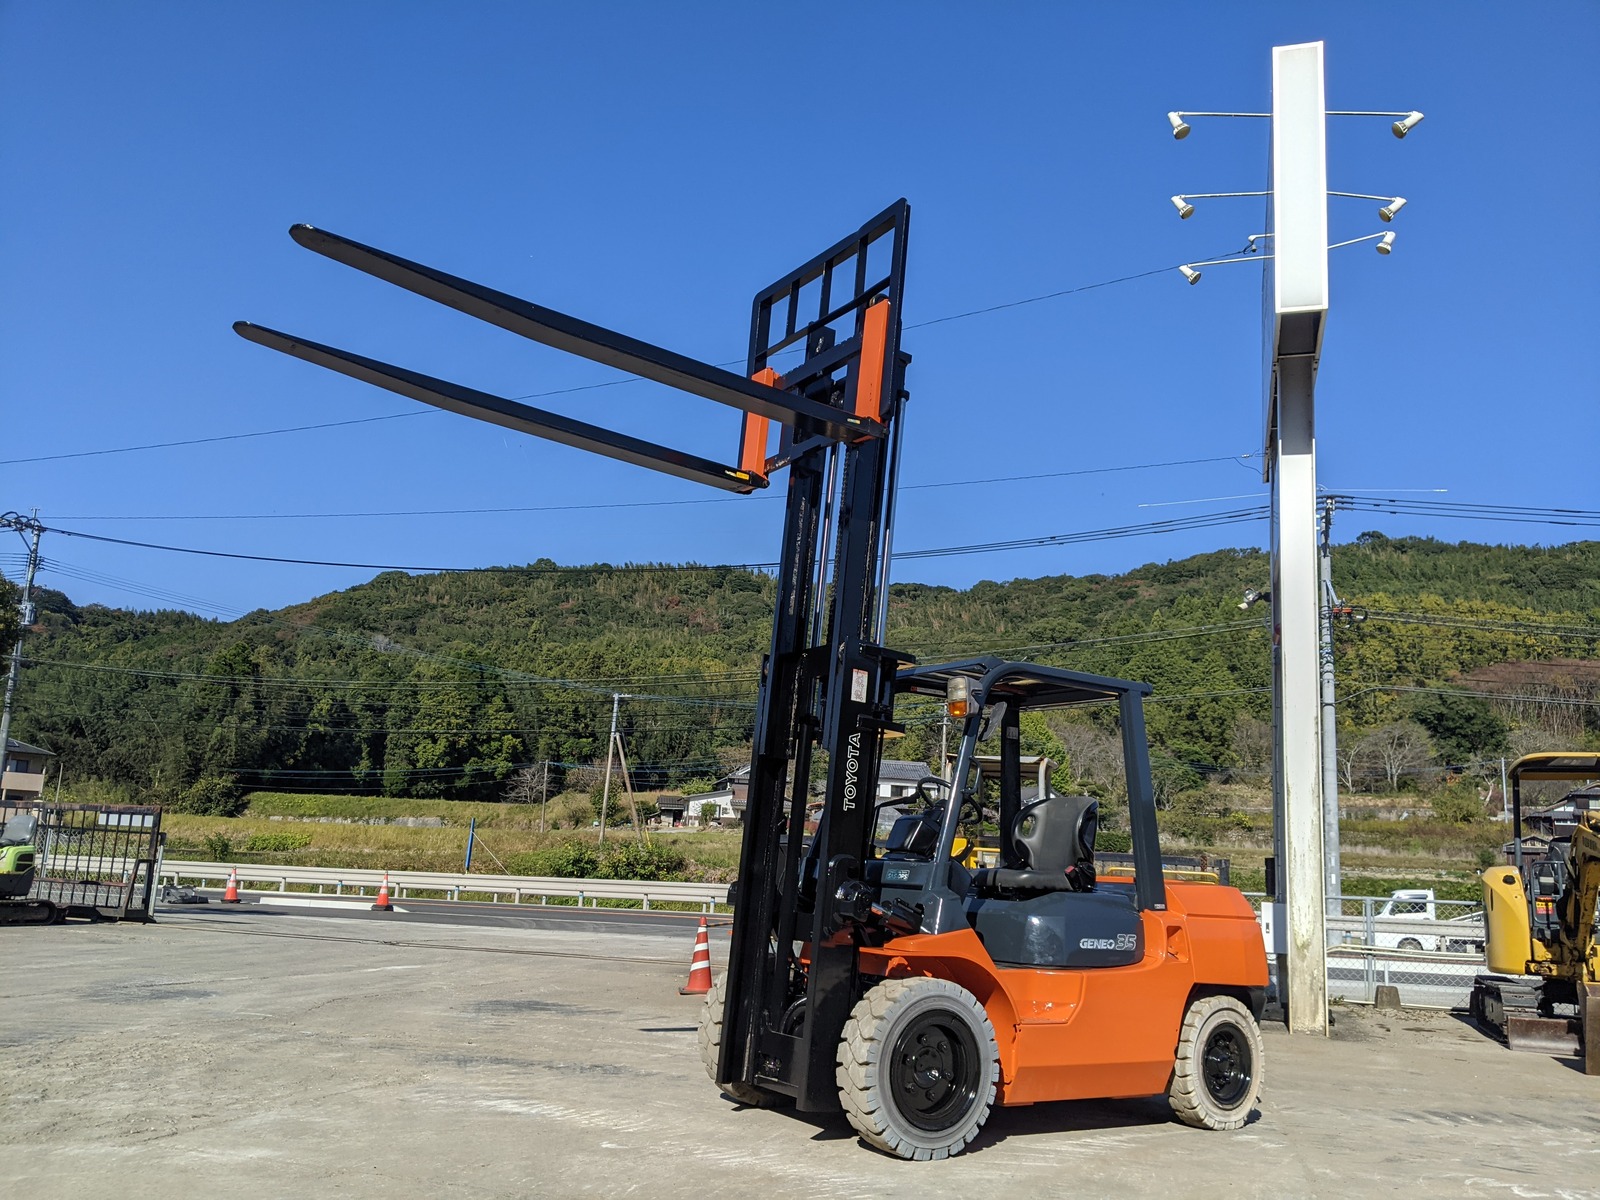 Used Construction Machine Used TOYOTA MOTOR CORPORATION Forklift Diesel engine 02-7FD35 Photos